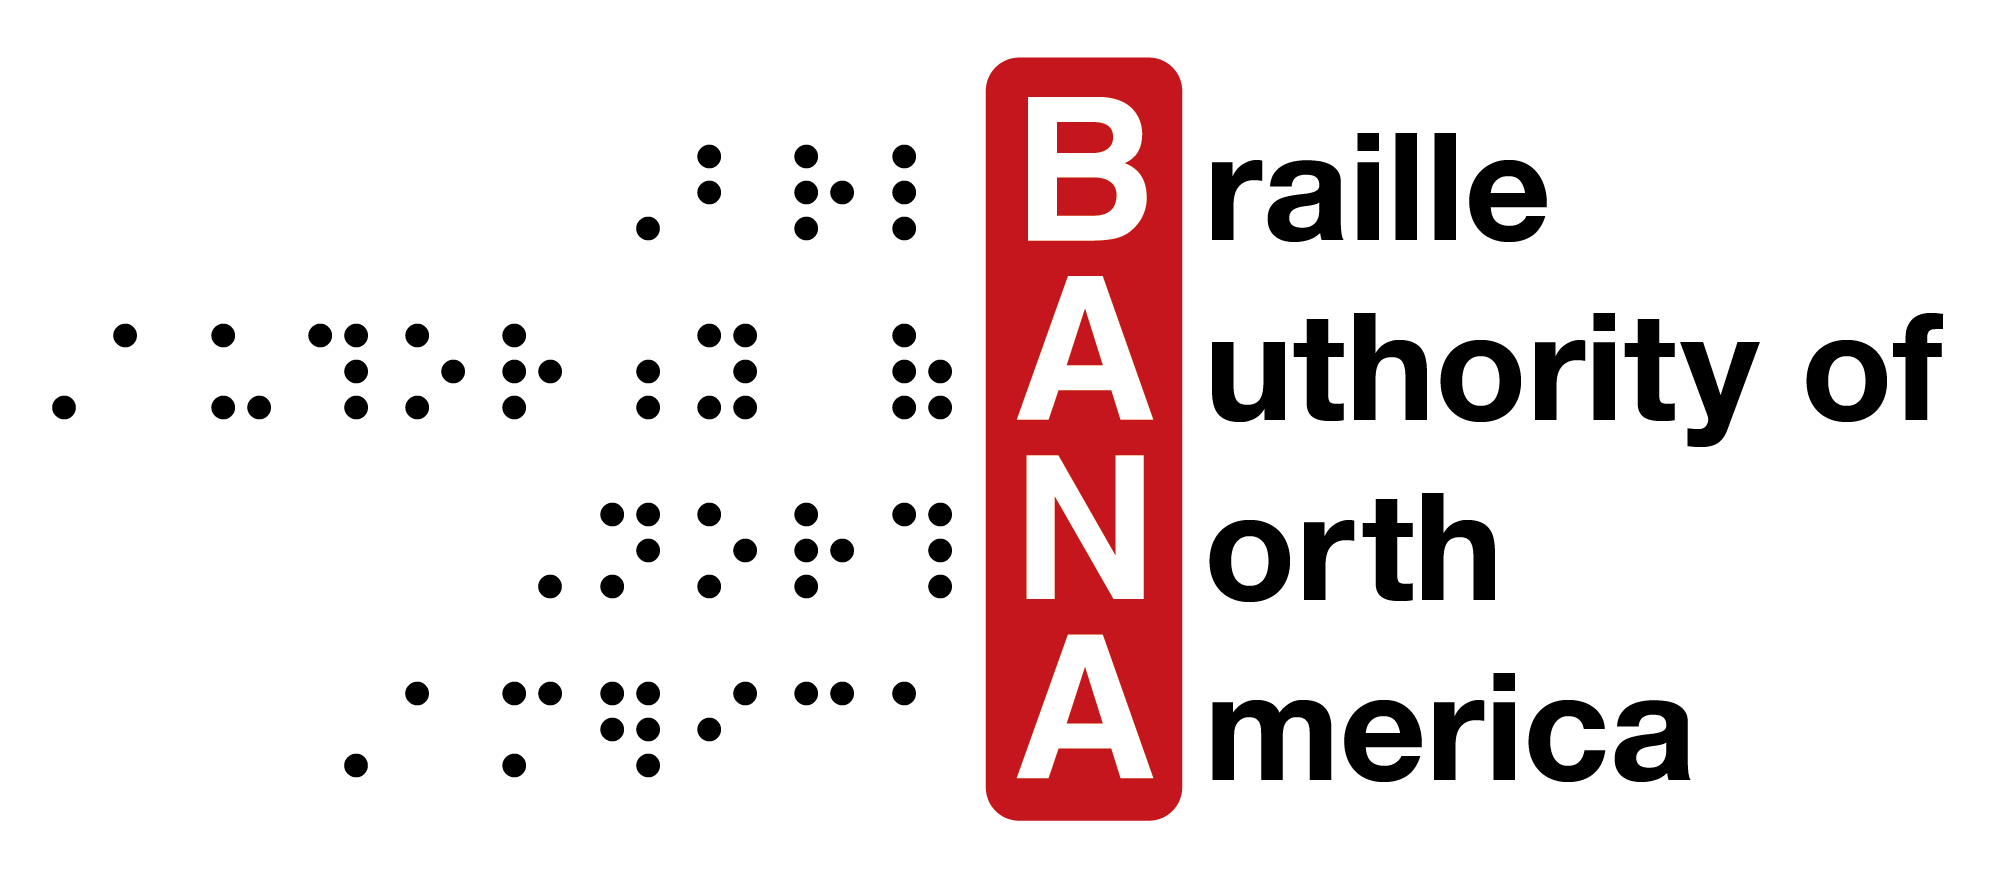 BANA logo with sim braille on left, horizontal BANA letters with red background, print letters on right